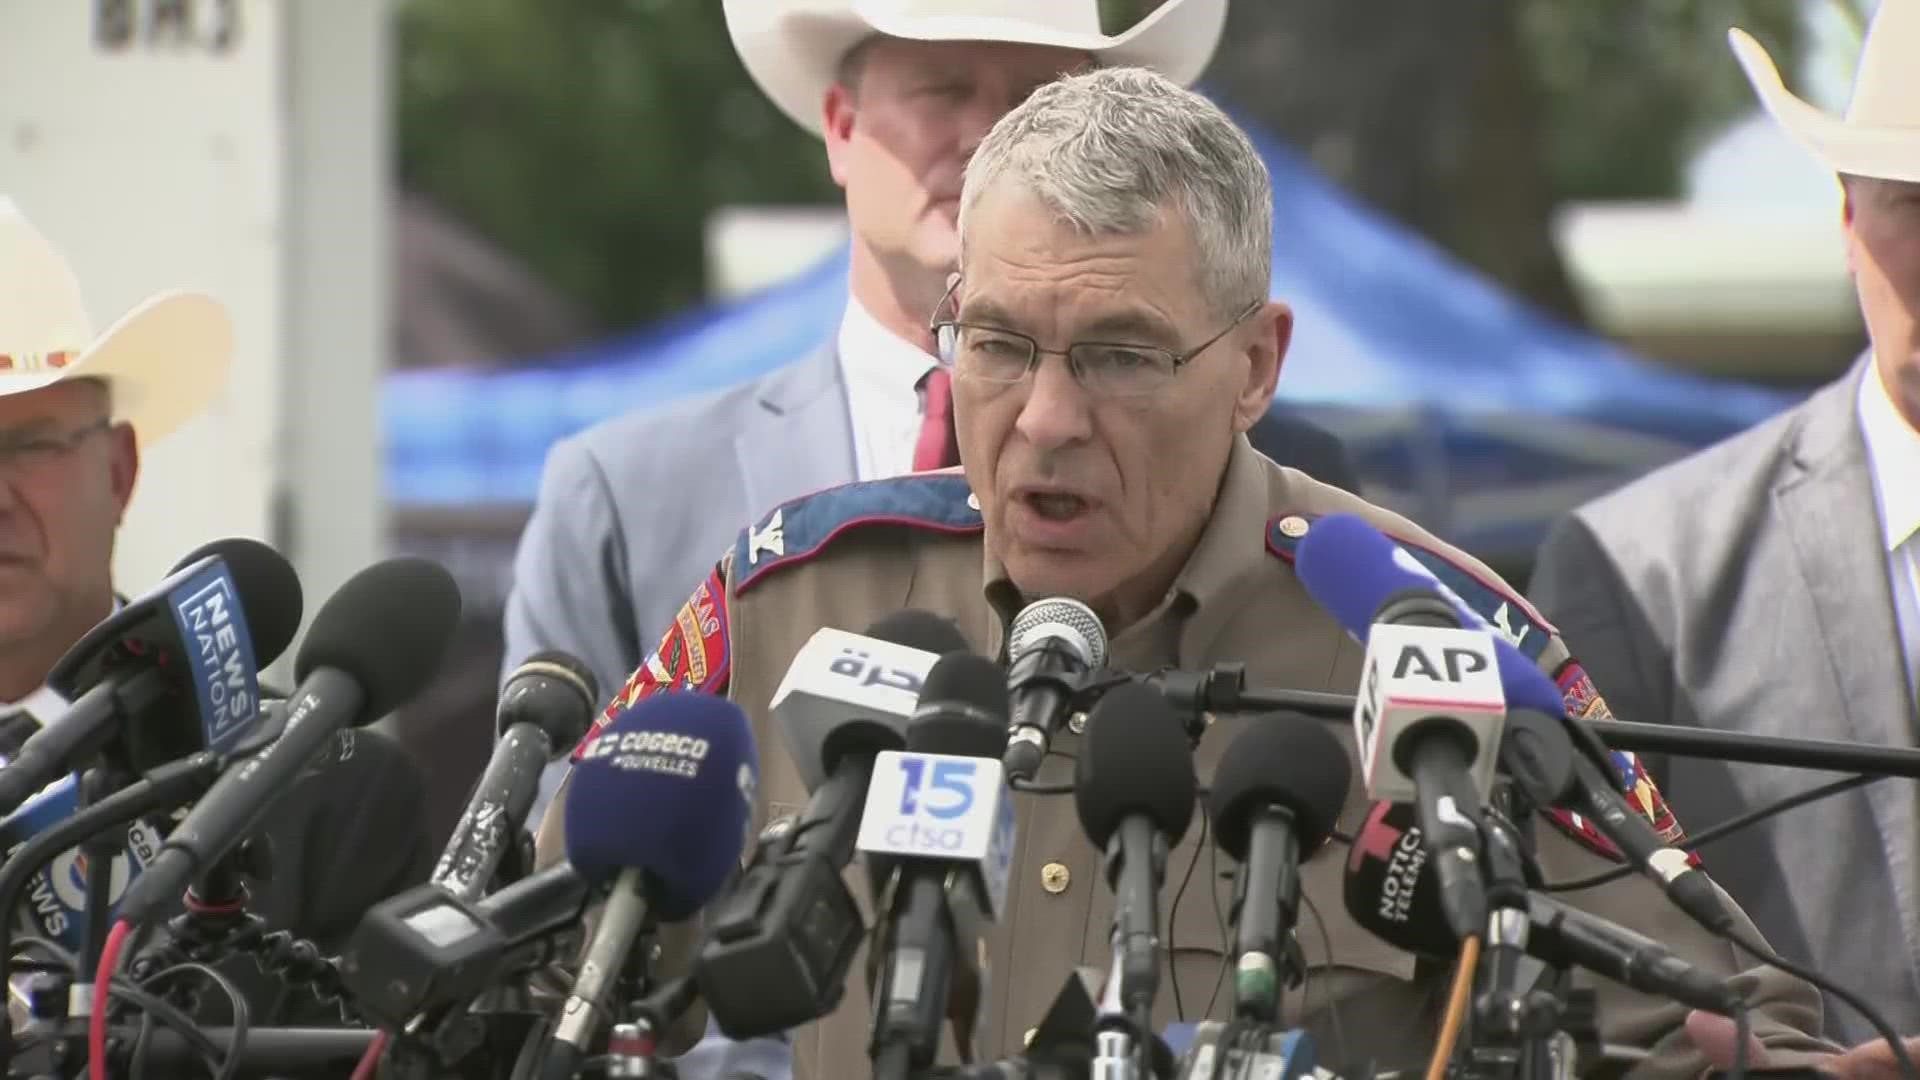 For the first time, investigators detailed the events leading up to the shooting and then law enforcement's response to the incident.